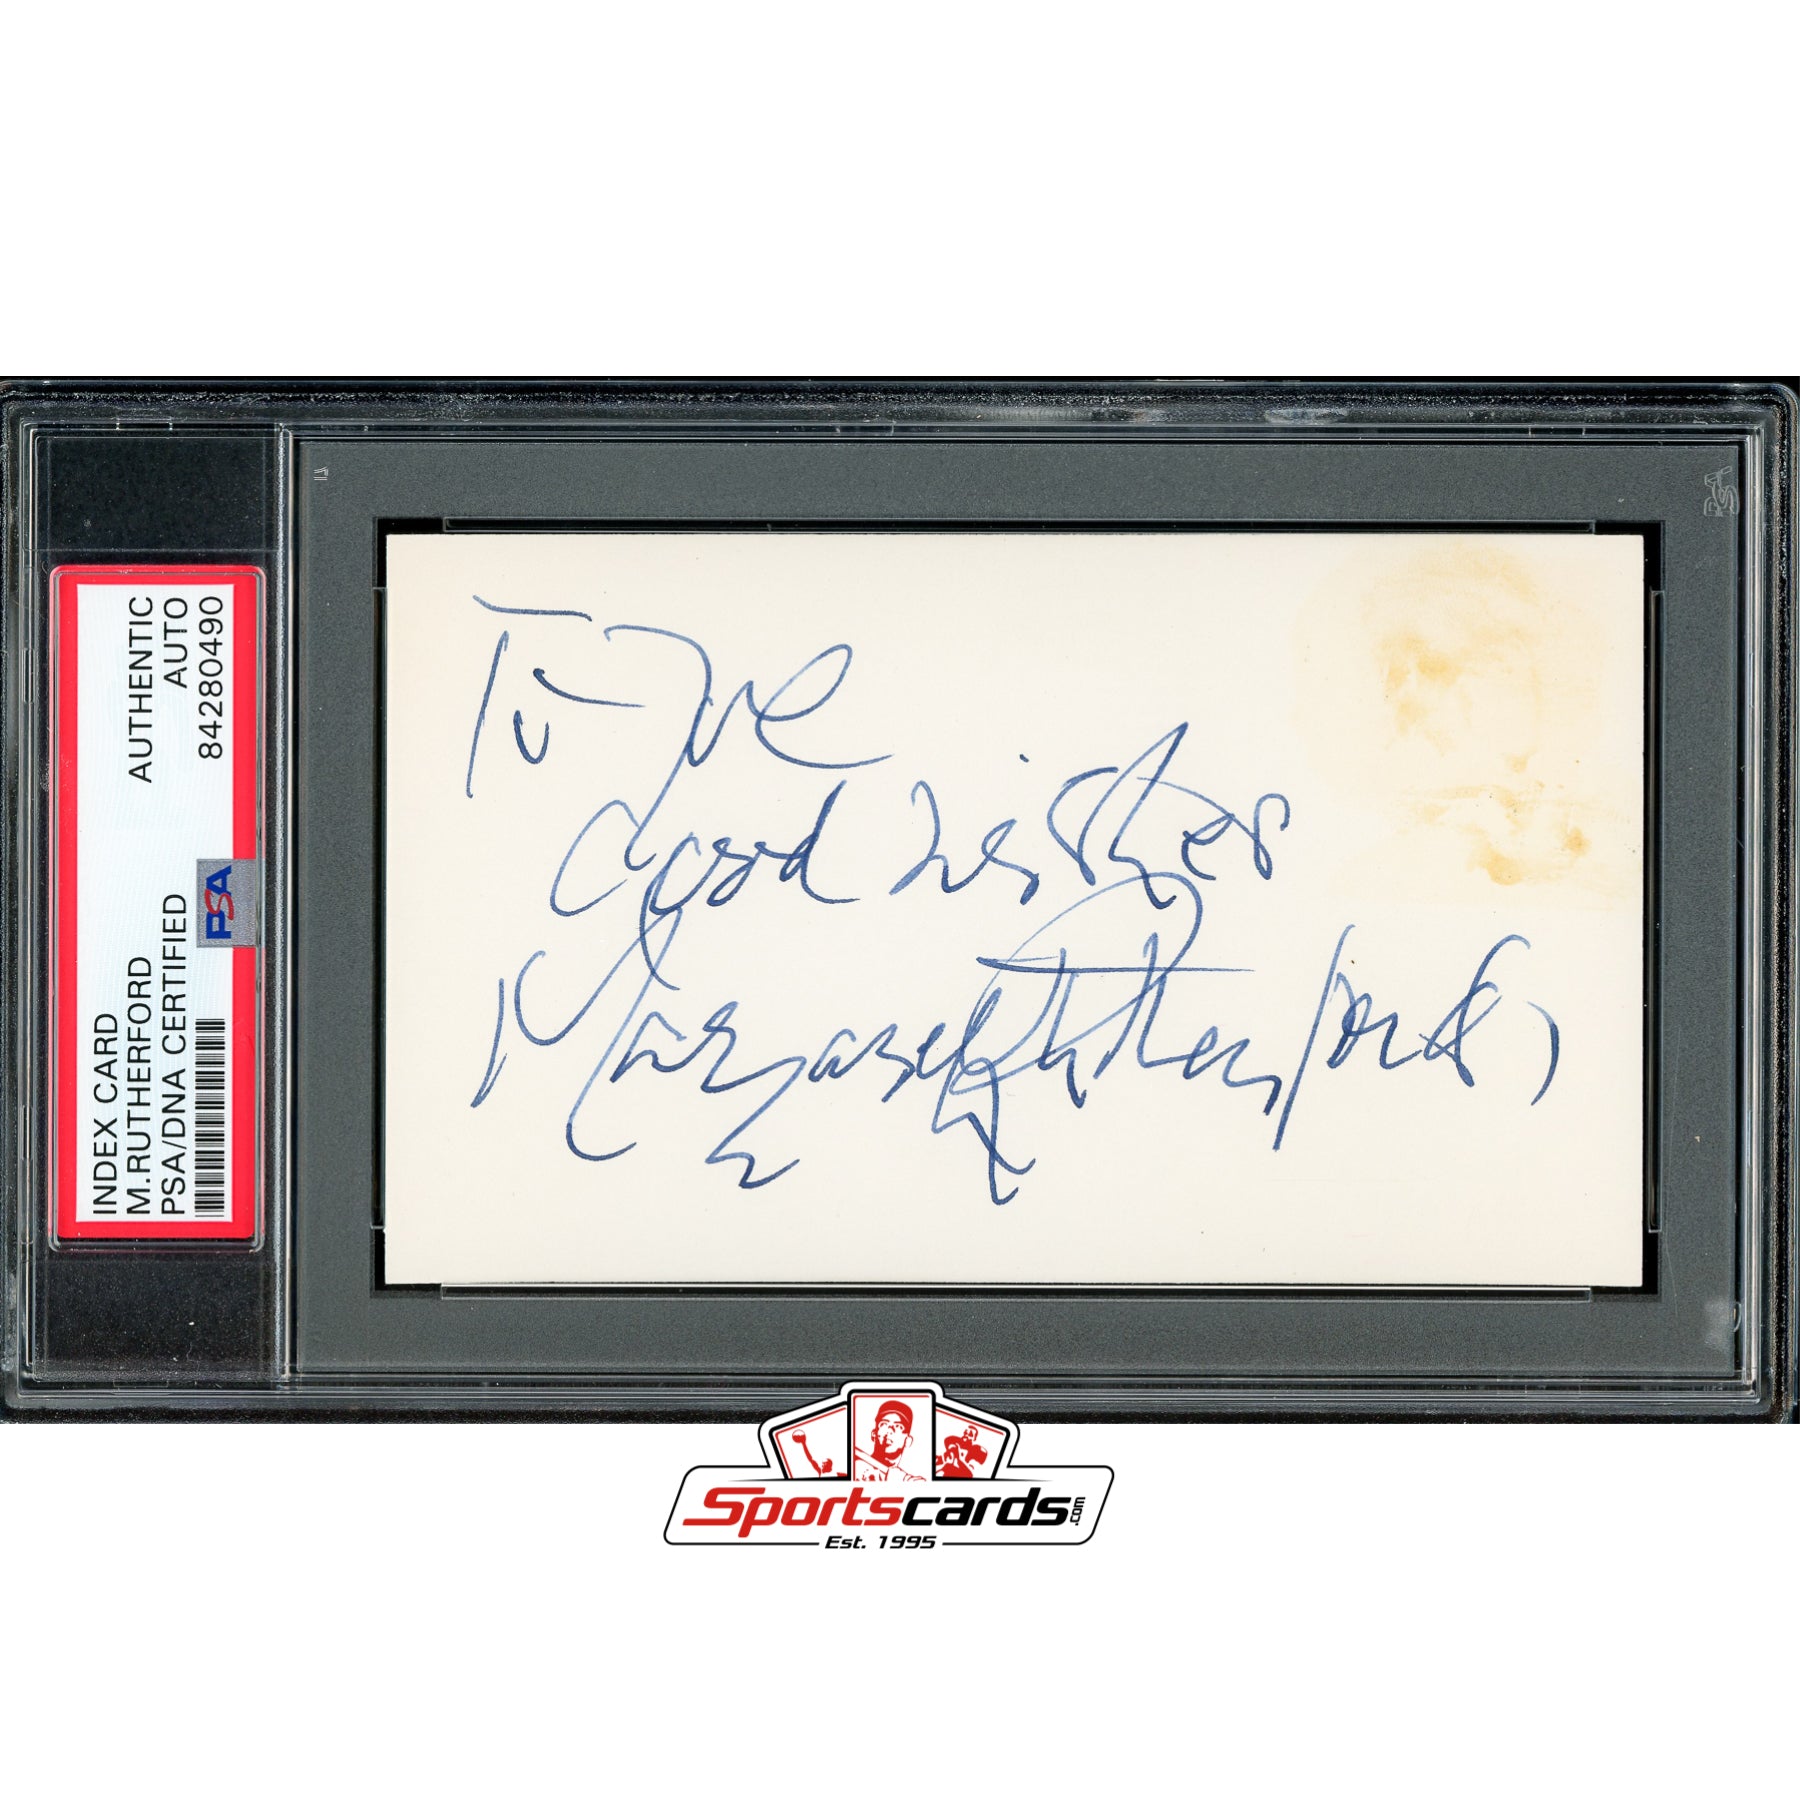 Margaret Rutherford (d.1972) Signed 3x5 Index Card Autograph PSA/DNA